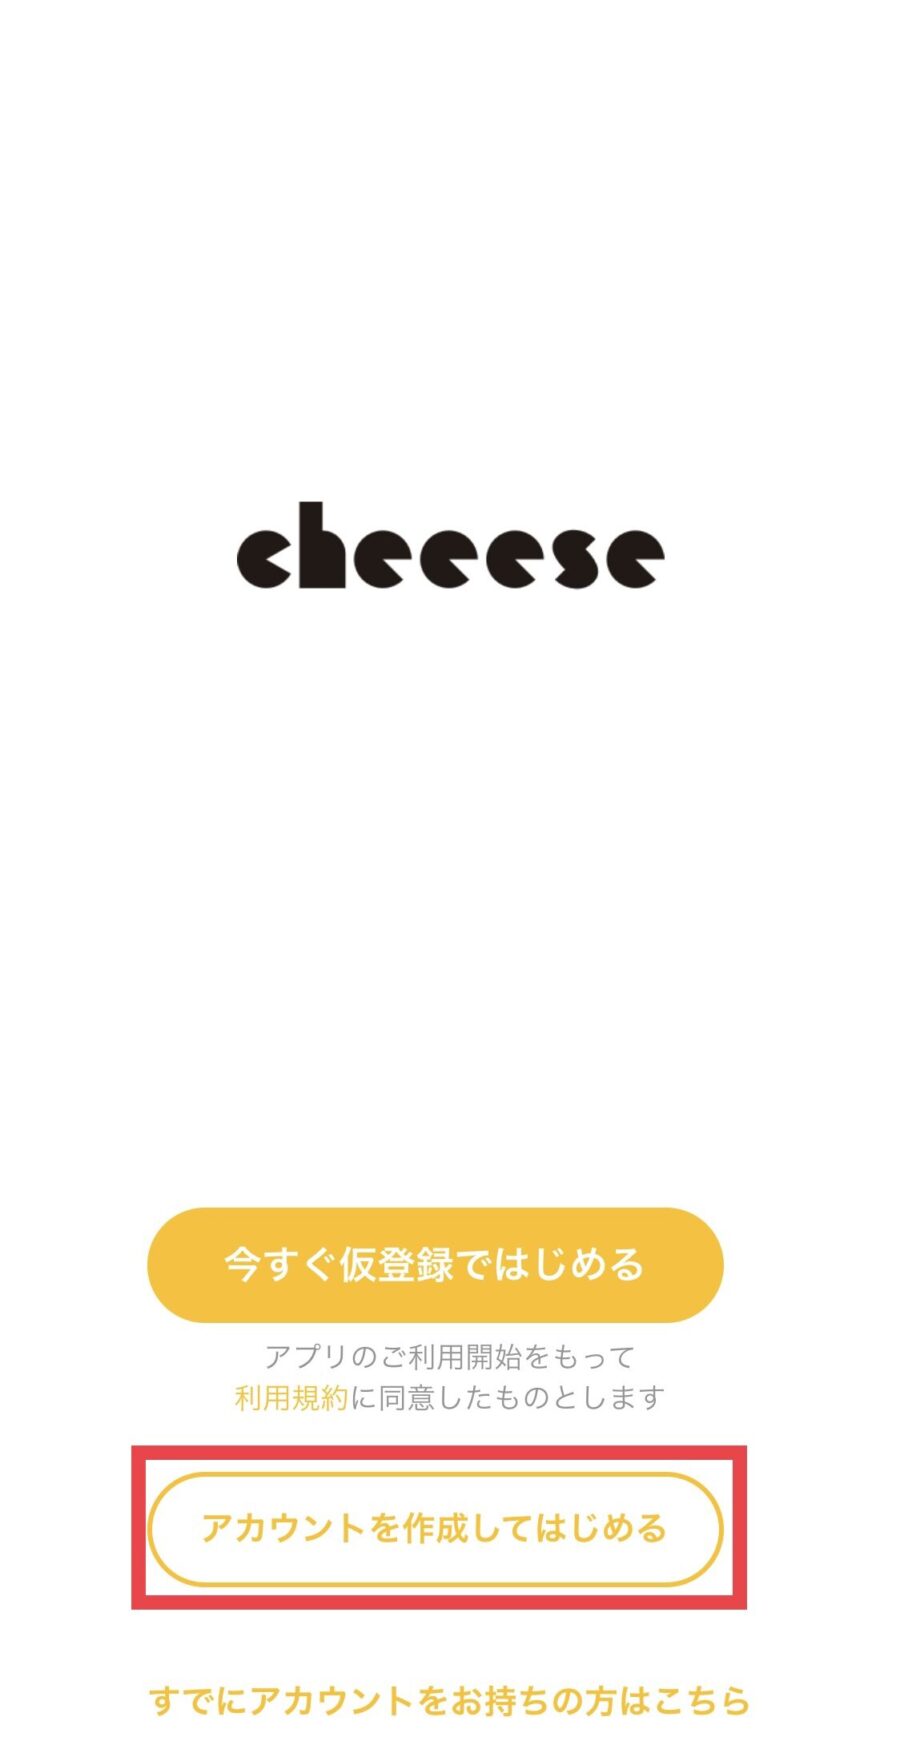 Cheeese（チーズ）